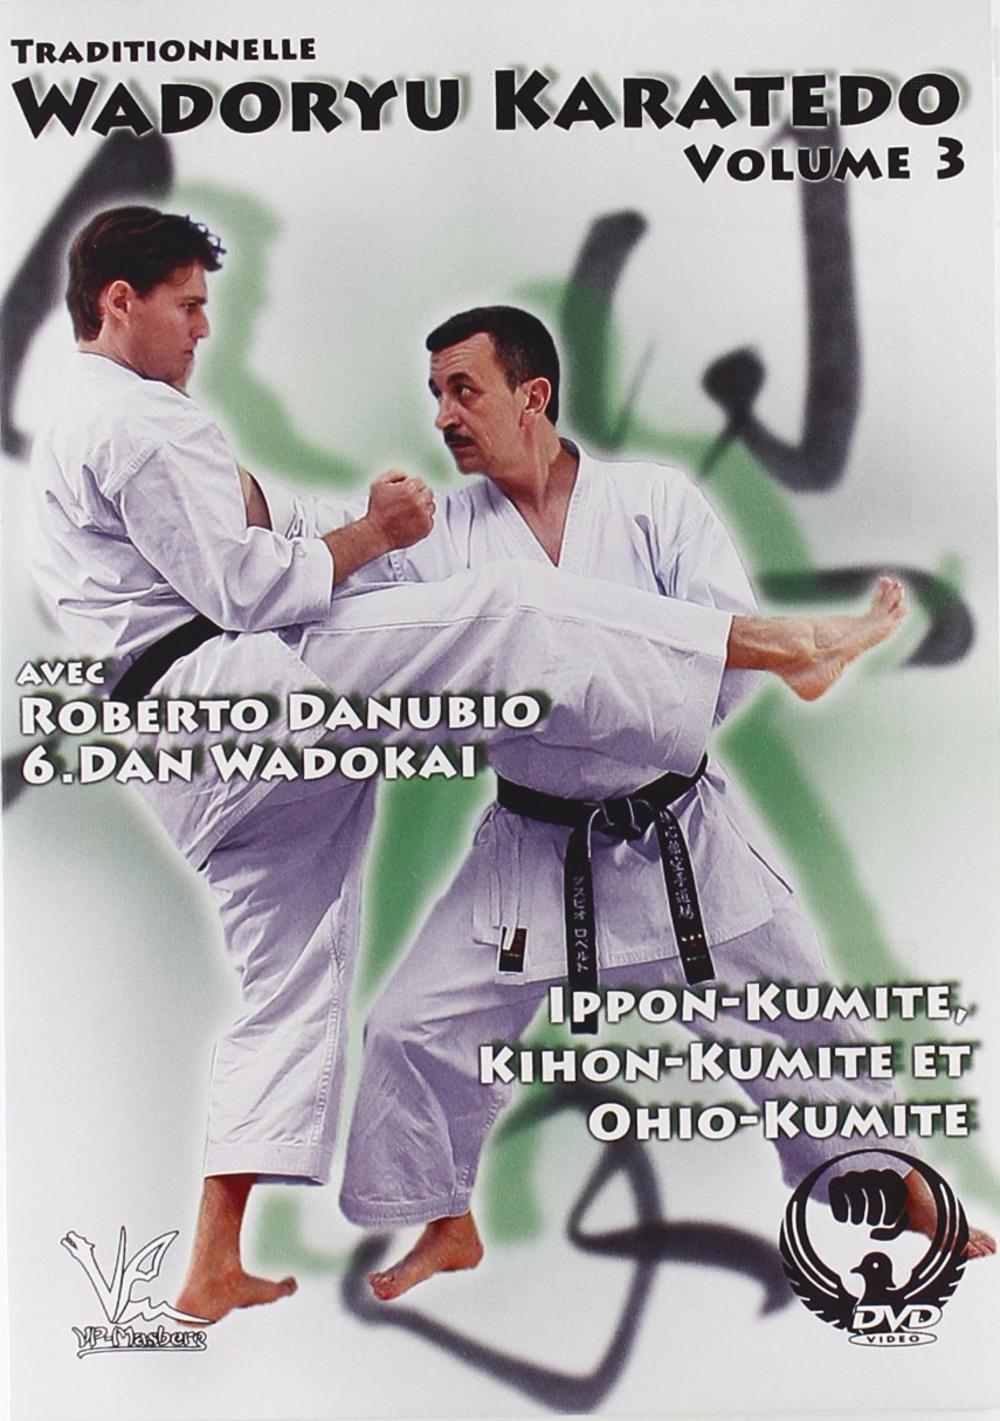 TRADITIONELLE WADORYU KARATE-DO VOL. 3  KUMITE